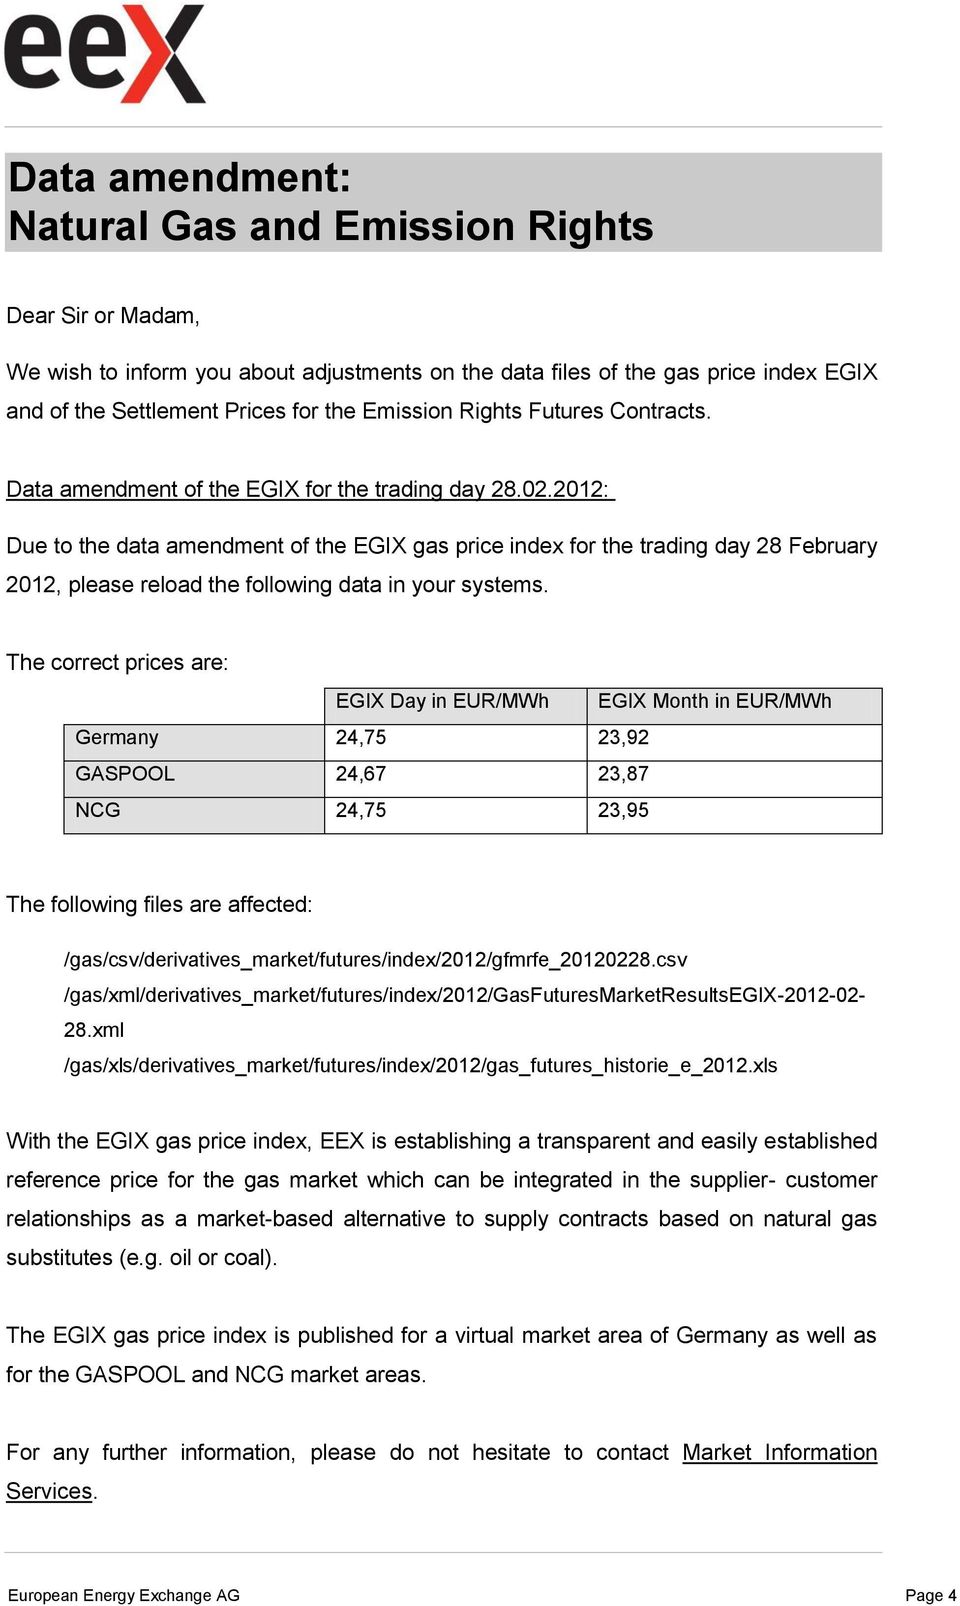 2012: Due to the data amendment of the EGIX gas price index for the trading day 28 February 2012, please reload the following data in your systems.